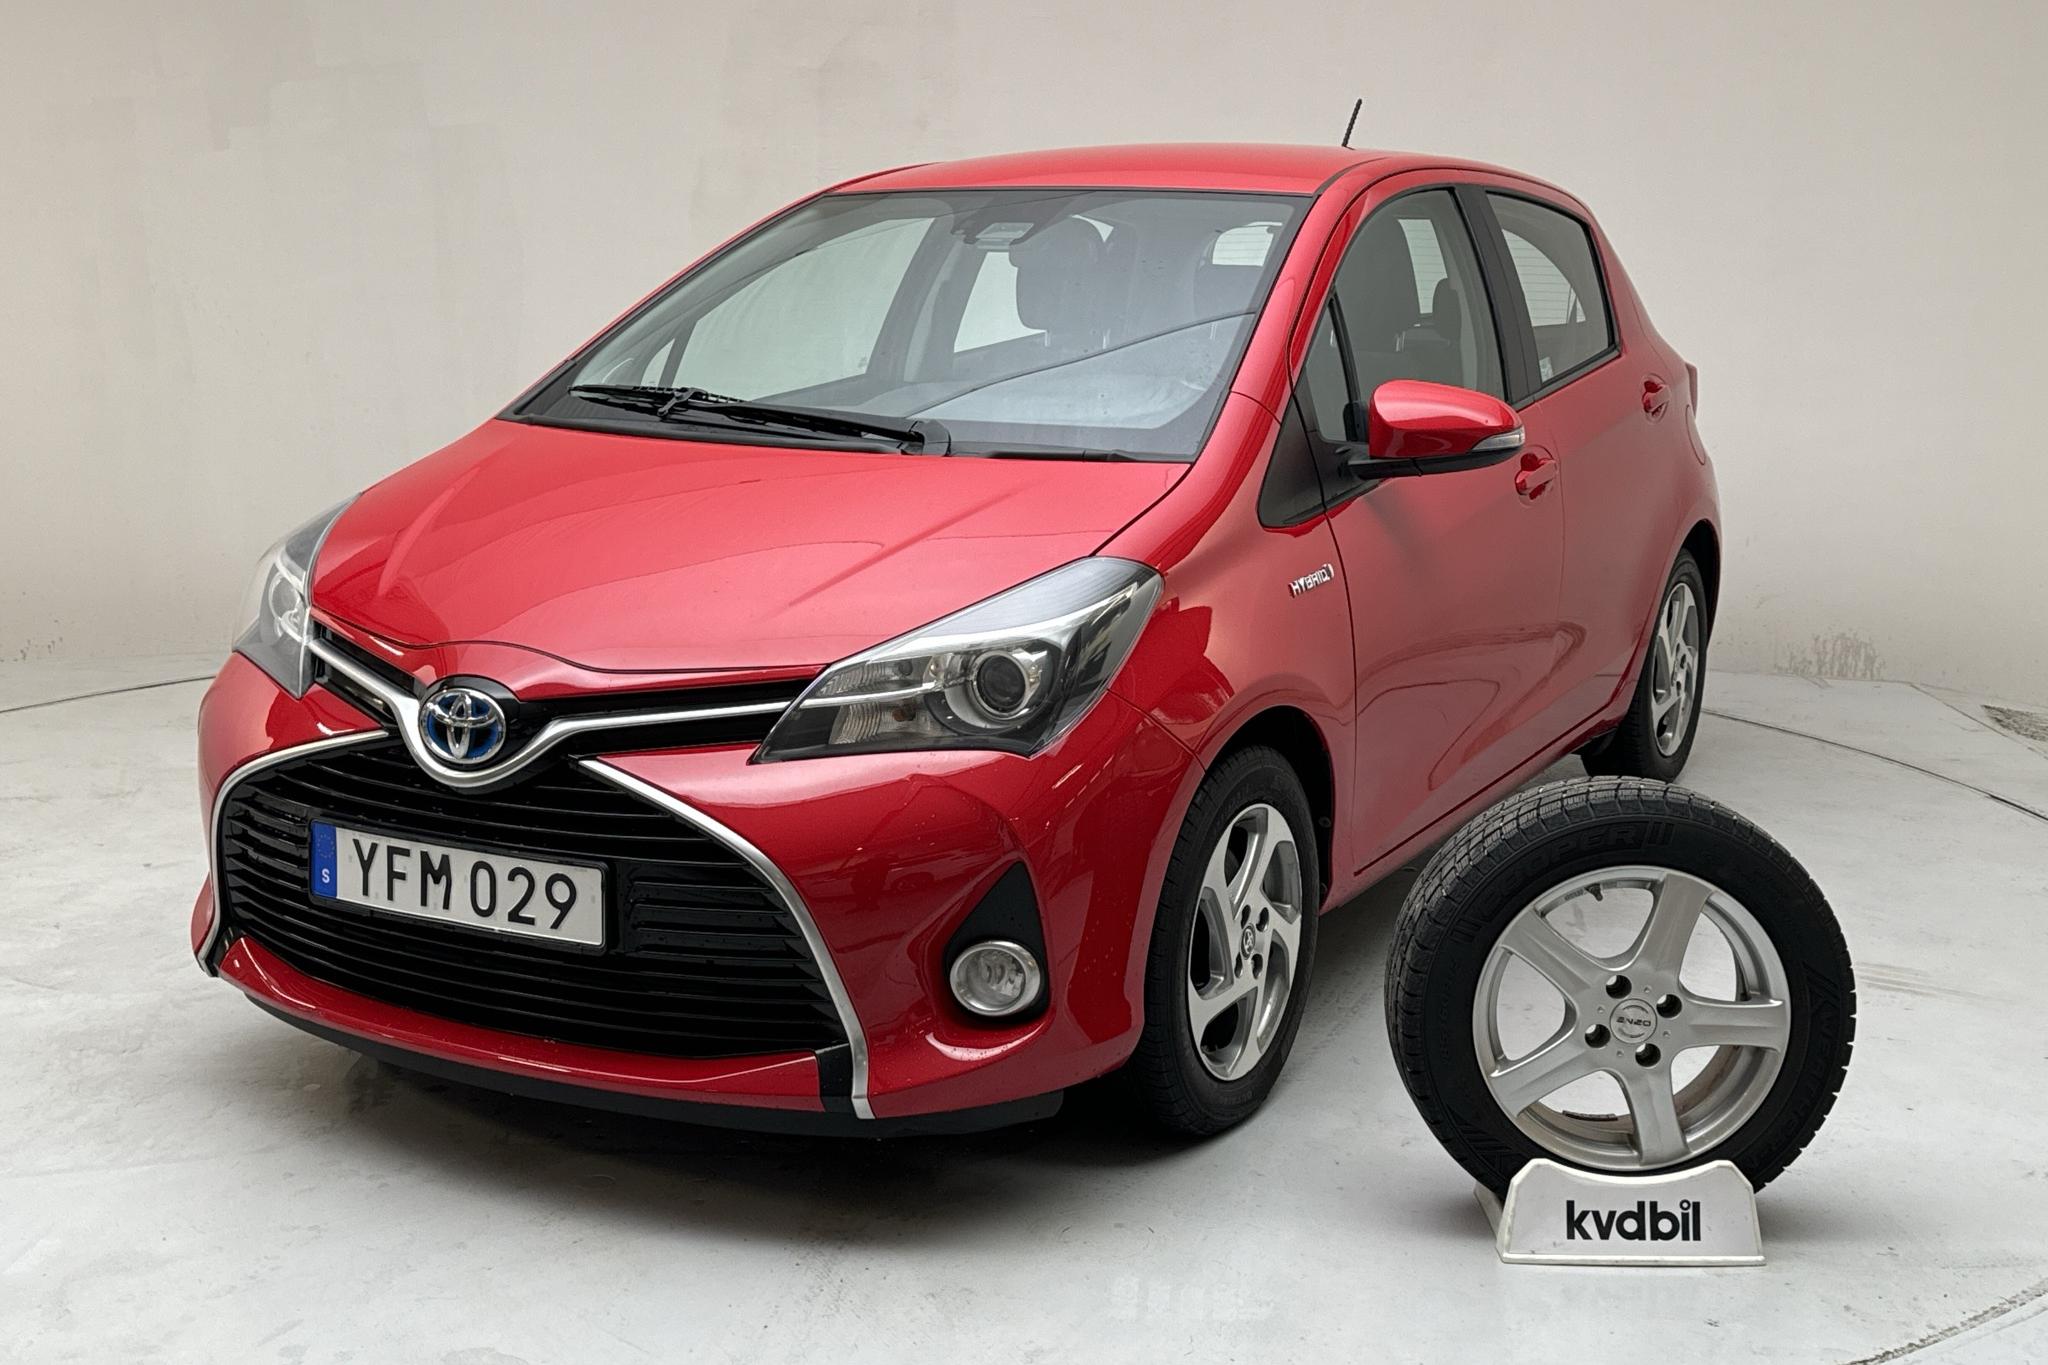 Toyota Yaris 1.5 HSD 5dr (75hk) - 82 110 km - Automatic - red - 2016